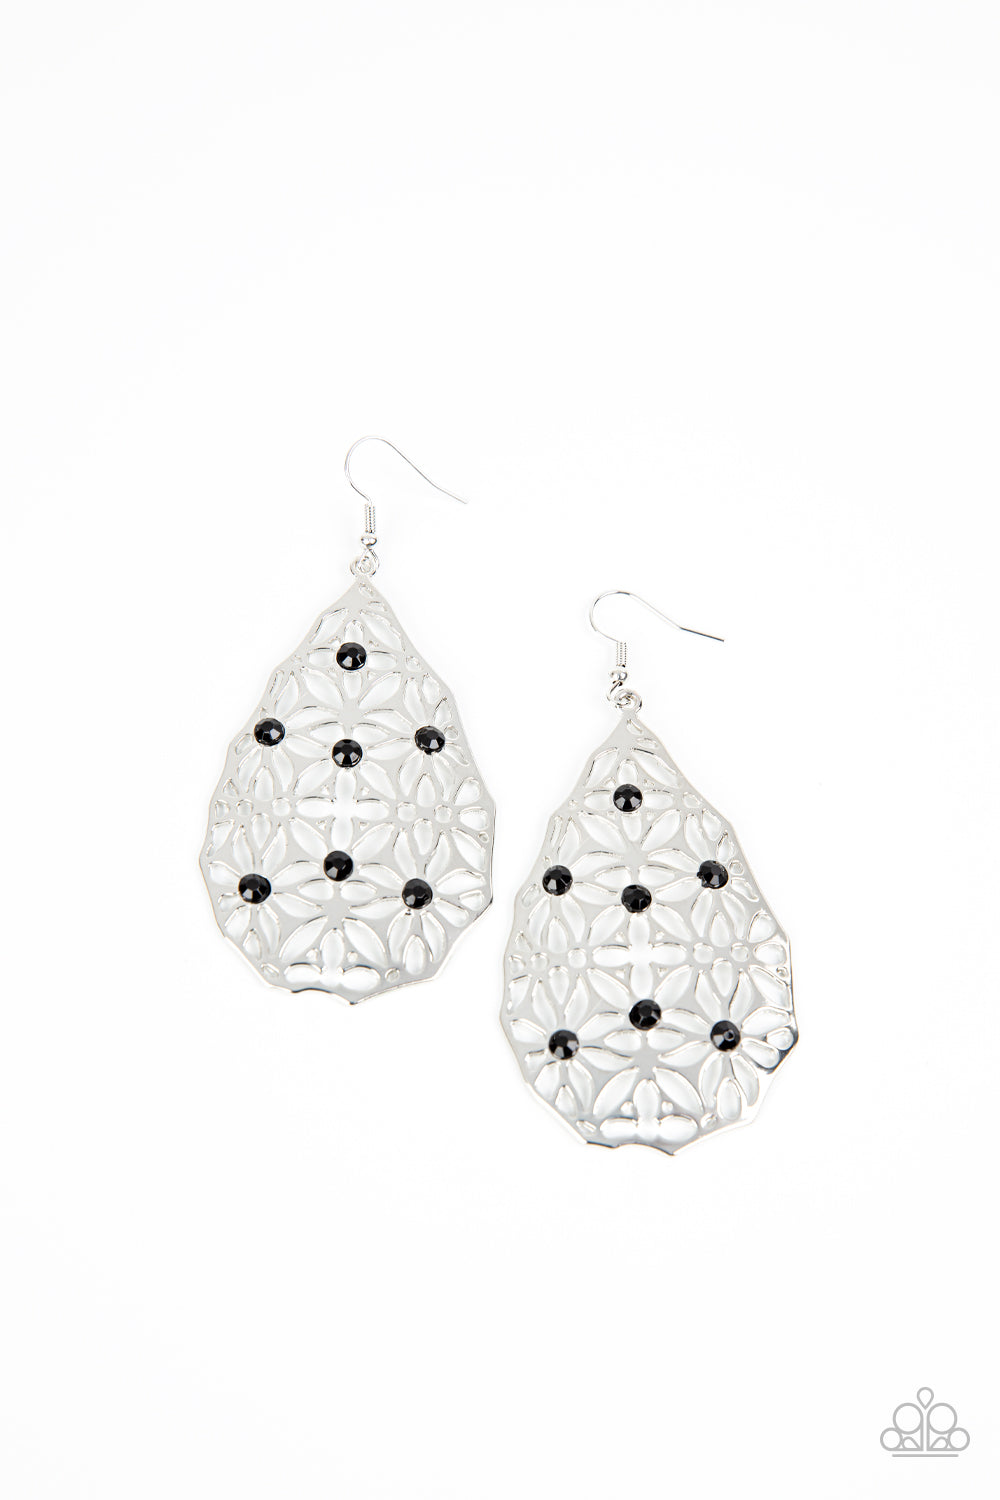 Delightfully Daisy - Black Item #P5WH-BKXX-223XX Shiny black beads are scattered across a teardrop frame filled with abstract floral filigree creating a whimsical lure. Earring attaches to a standard fishhook fitting.  Sold as one pair of earrings.